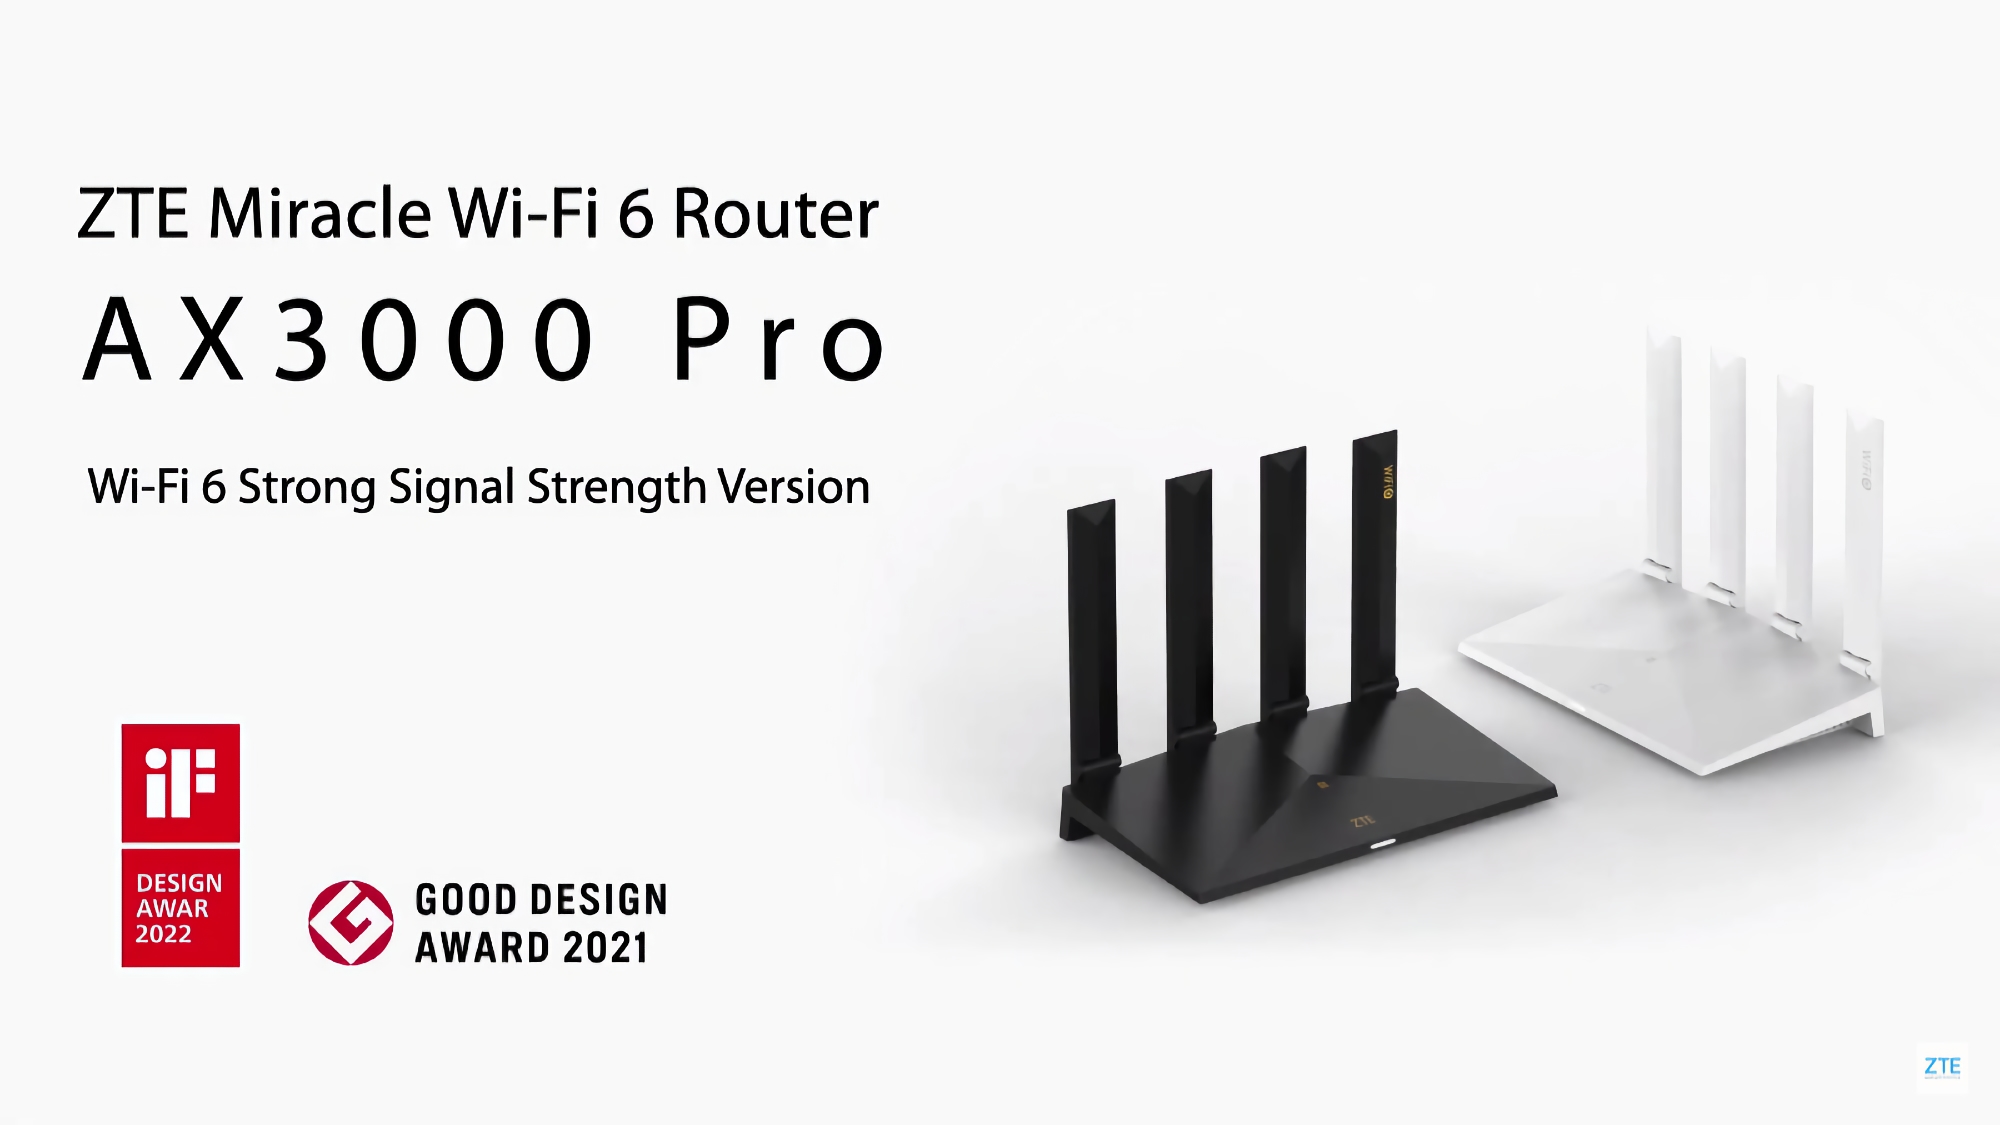 ZTE launched AX3000 Pro router with Wi-Fi 6, NFC and Qualcomm chip for $99 on the global market